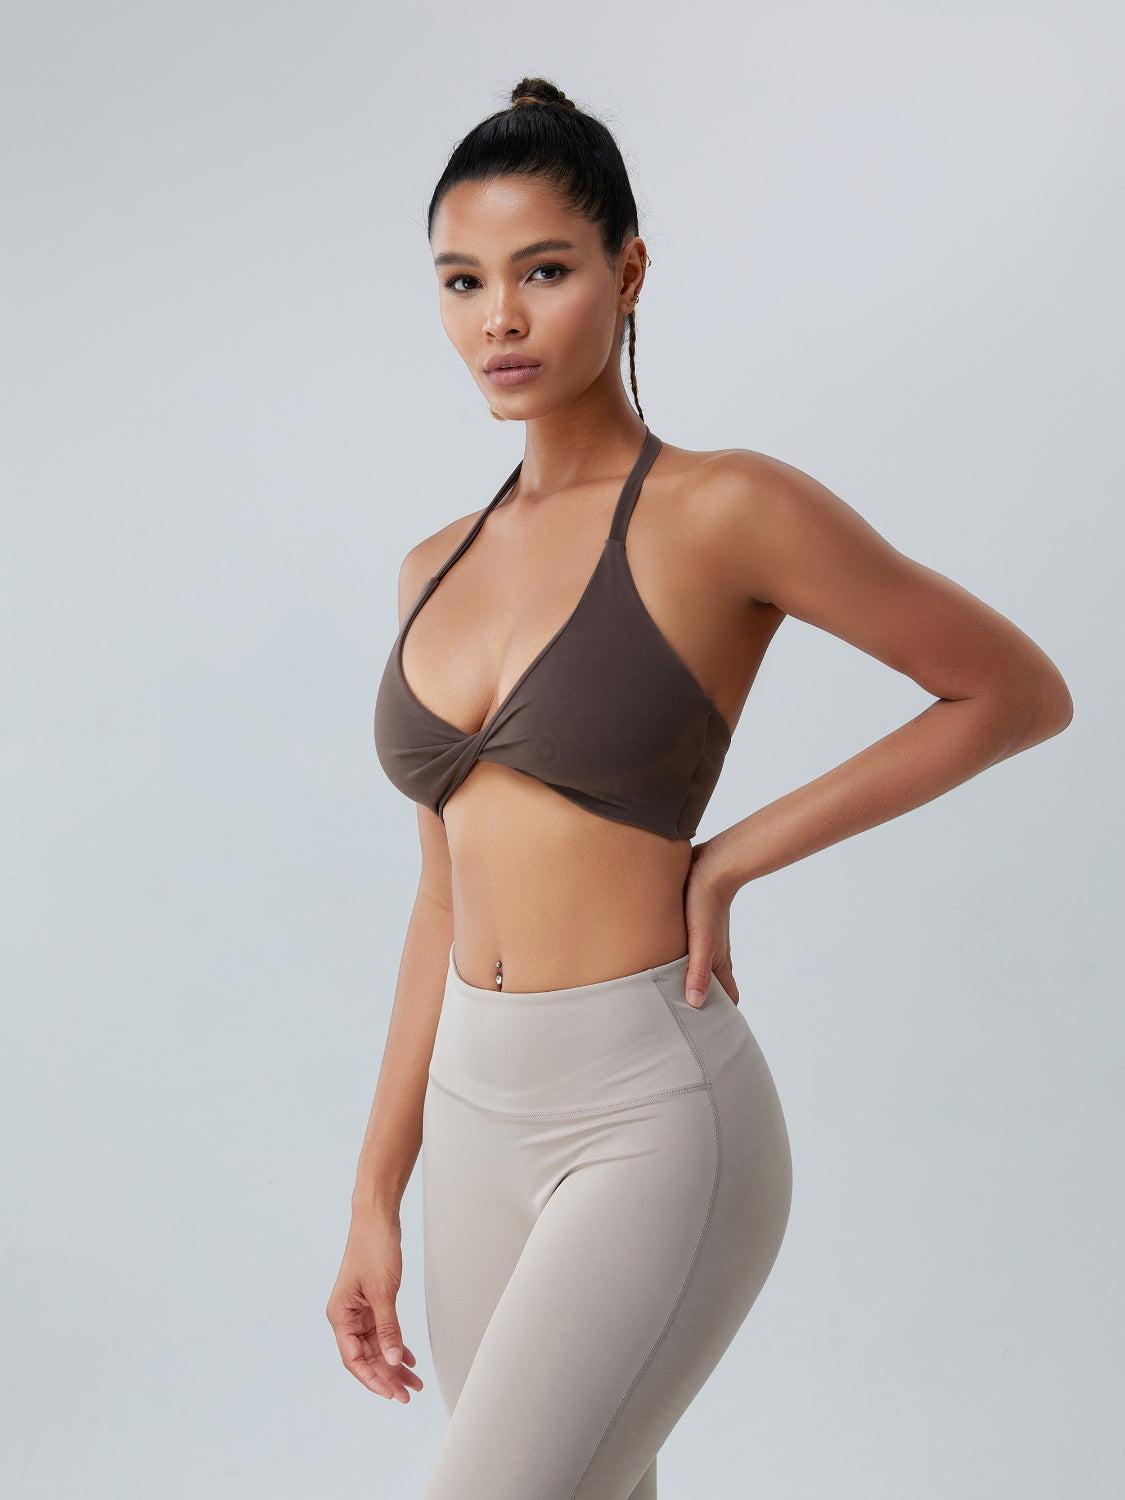 a woman wearing a bra top and leggings